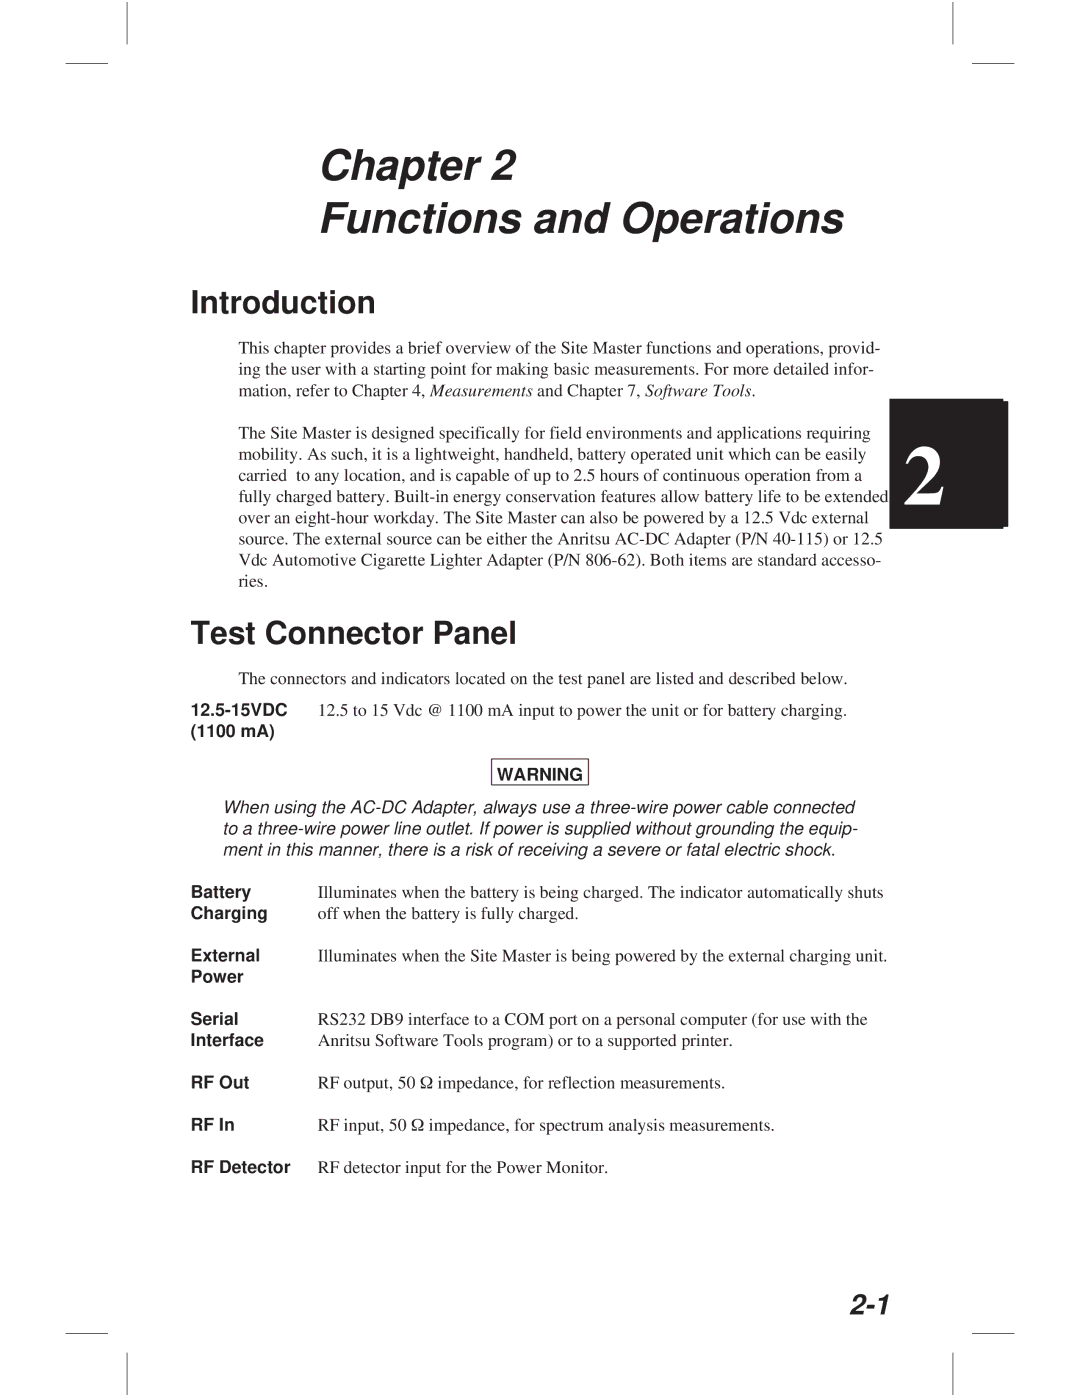 Anritsu S113C, S332C, S114C, S331C manual Chapter Functions and Operations, Test Connector Panel 